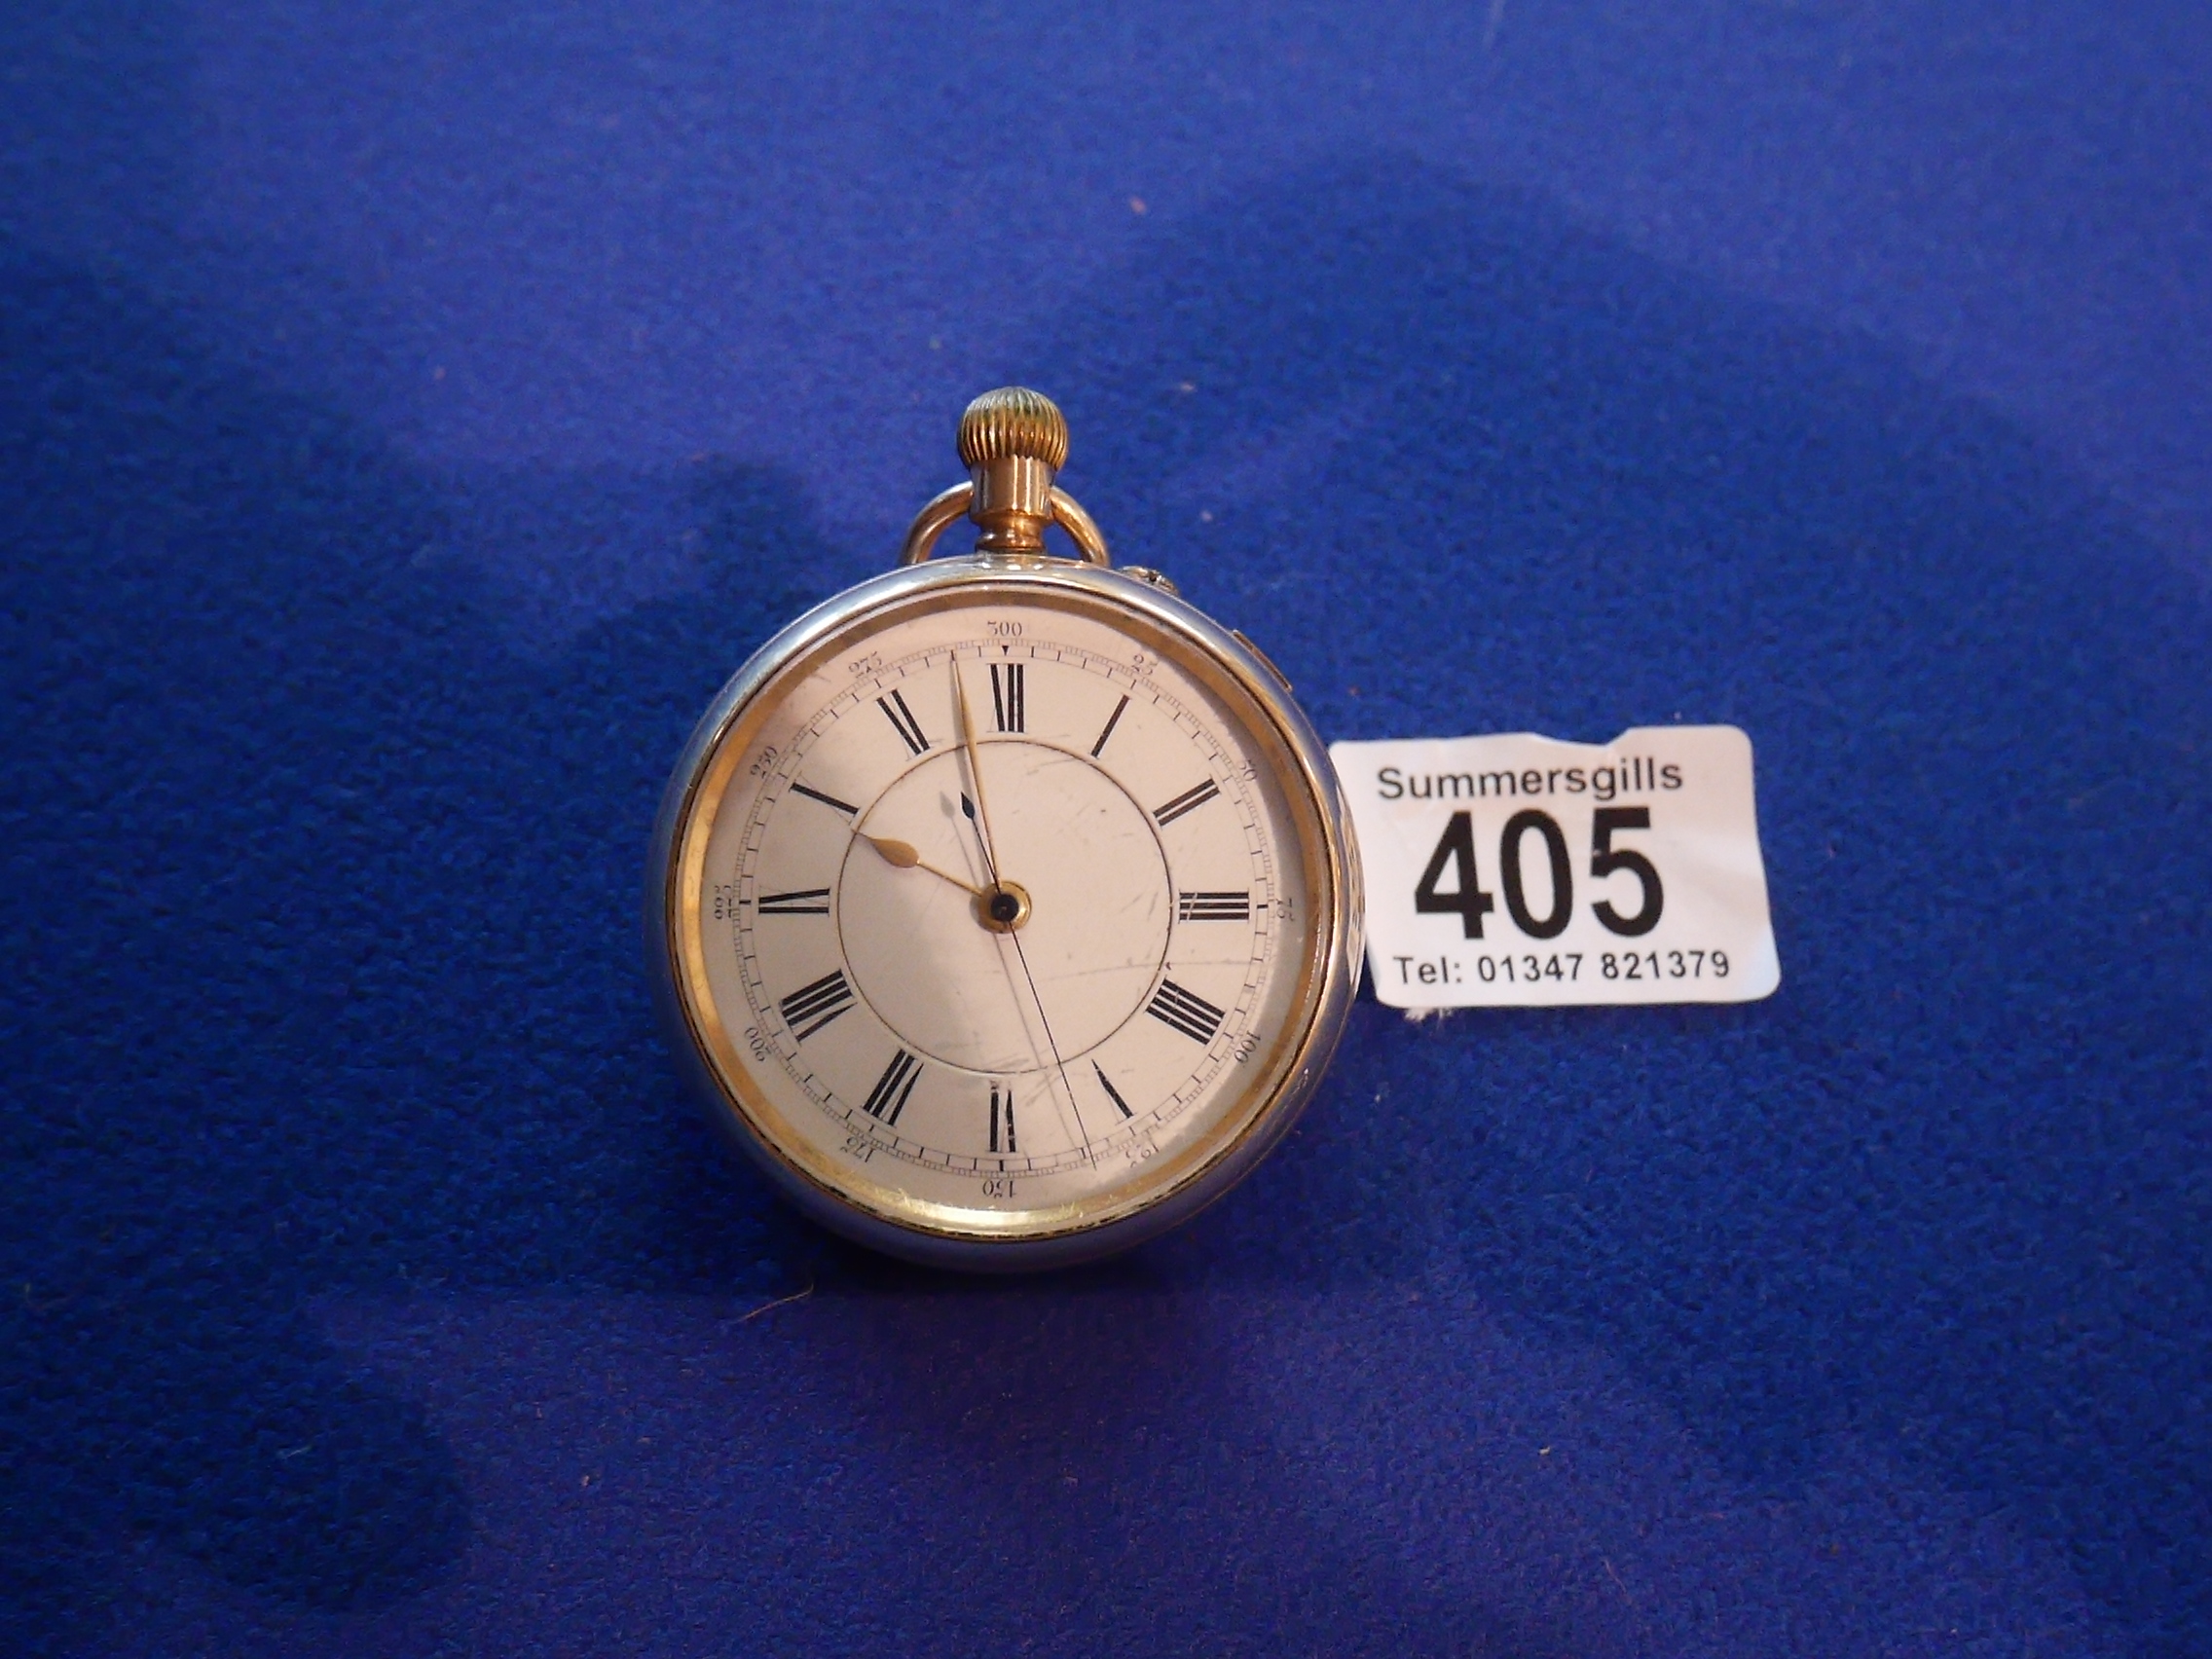 London-Made Gents Gold pocket watch (not working) - marked "Two Plates of 14ct Gold" to case